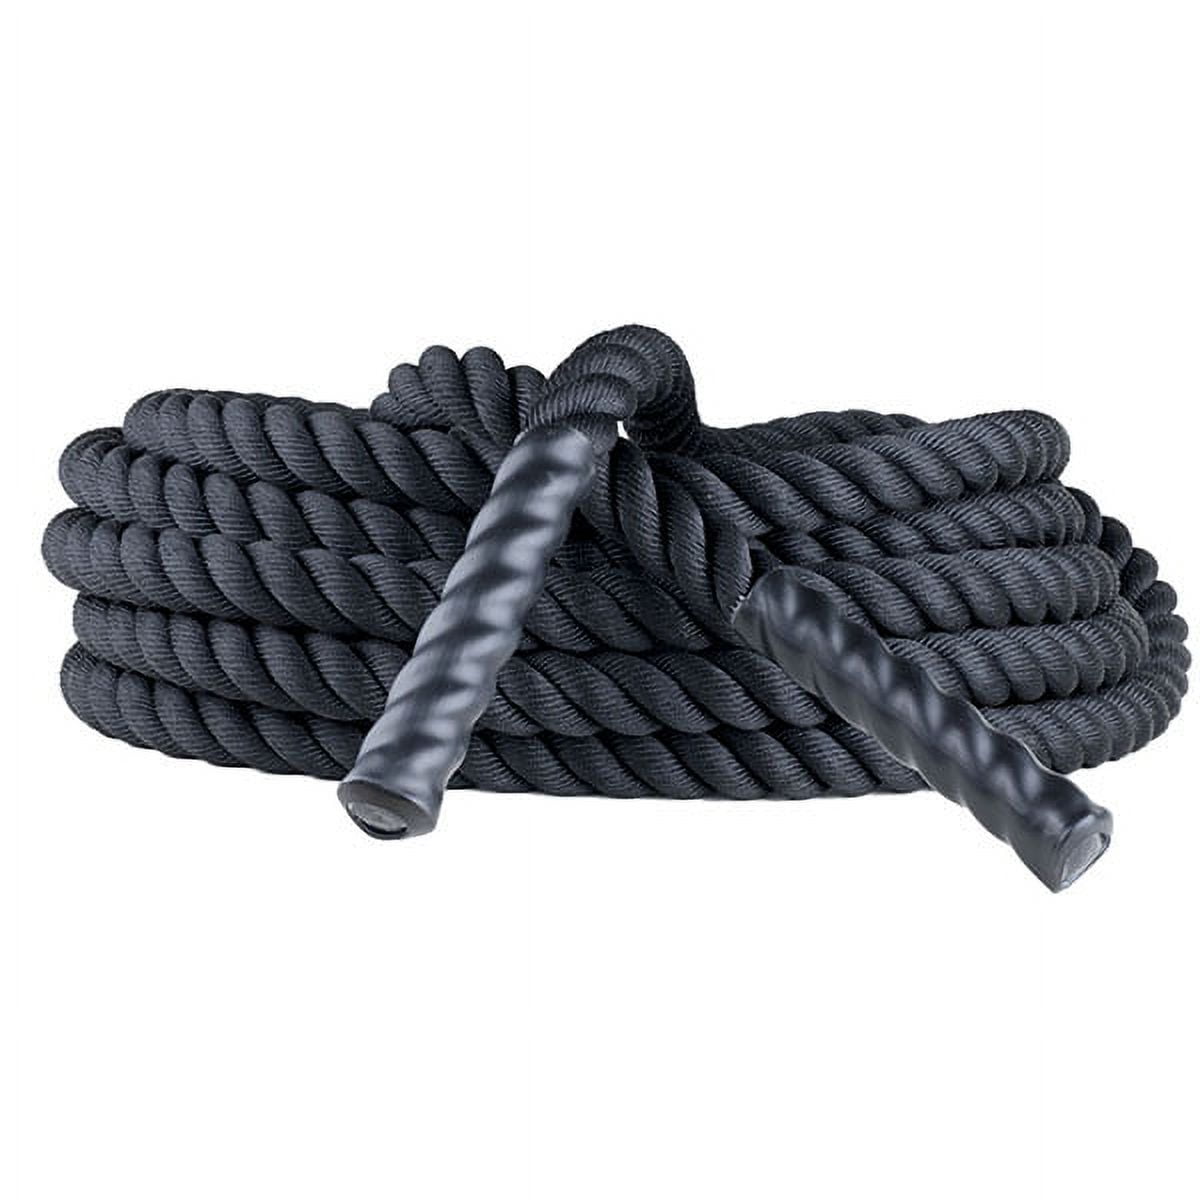 Picture of Champion Sports RPT1540 1.5 in. x 40 ft. Rhino Poly Training Rope, Black